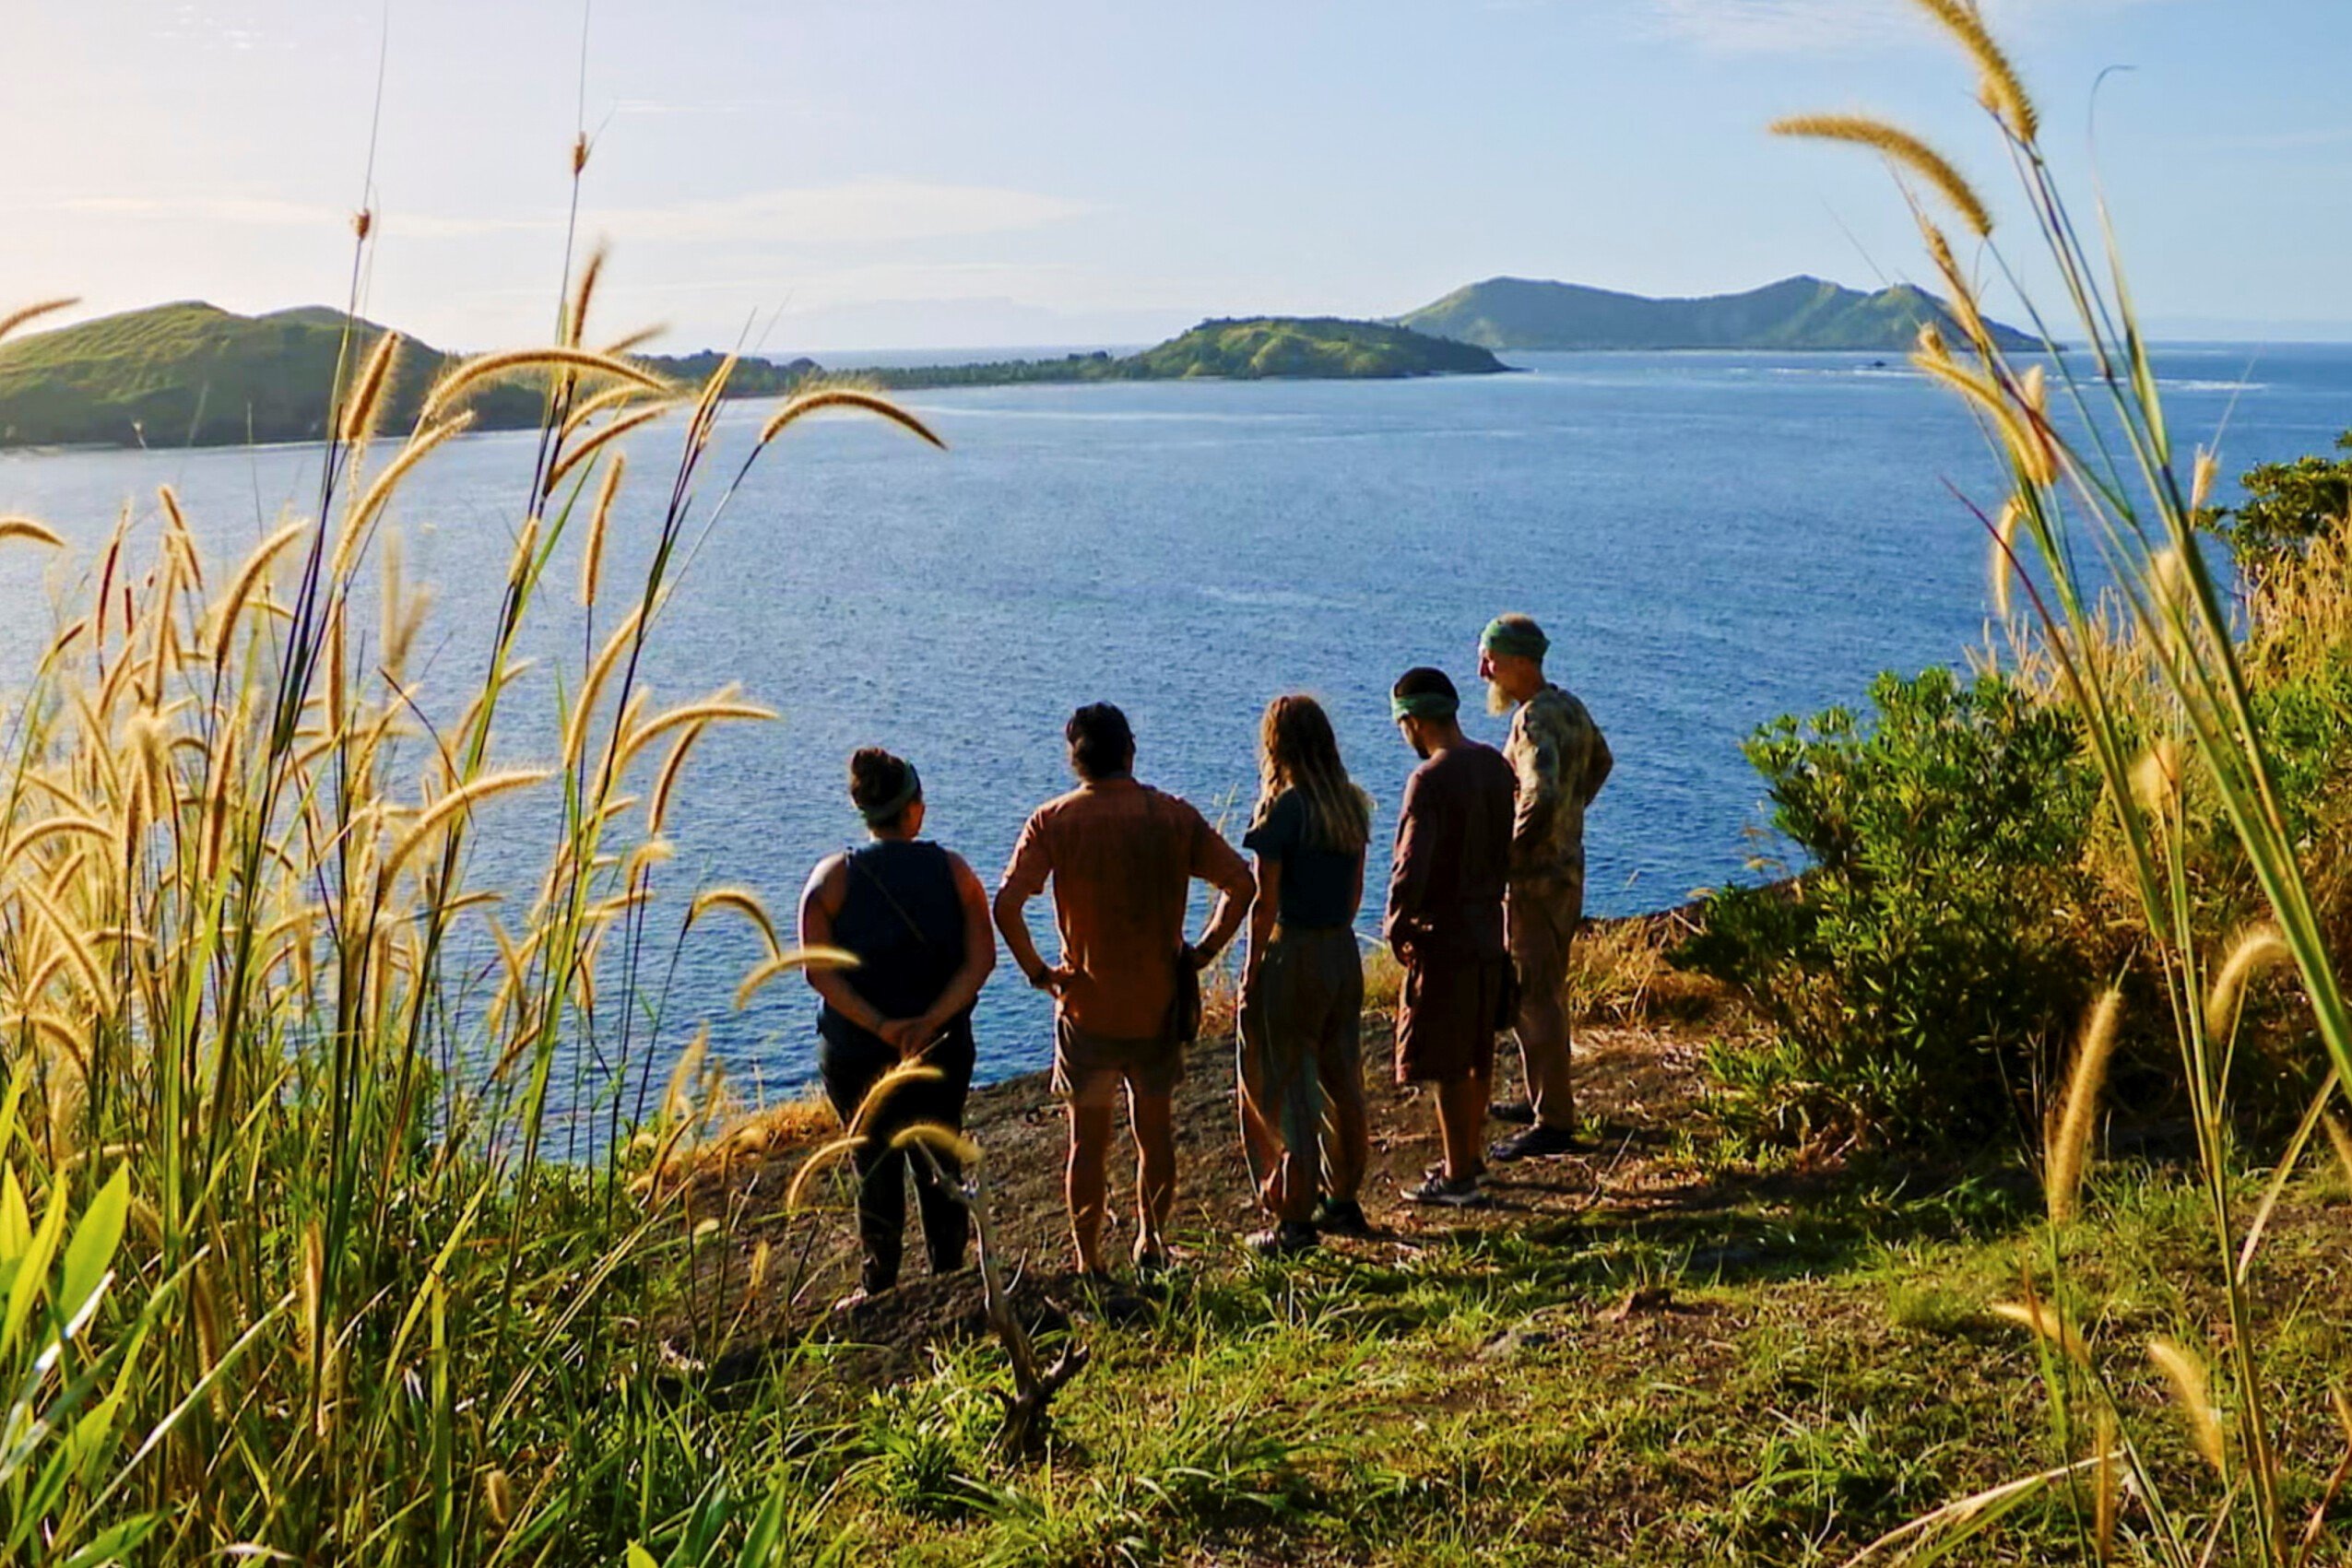 Karla Cruz Godoy, Owen Knight, Cassidy Clark, Jesse Lopez, and Mike Gabler, who star in the 'Survivor' Season 43 finale tonight, Dec. 14, stand on the edge of a cliff, looking out at the ocean.